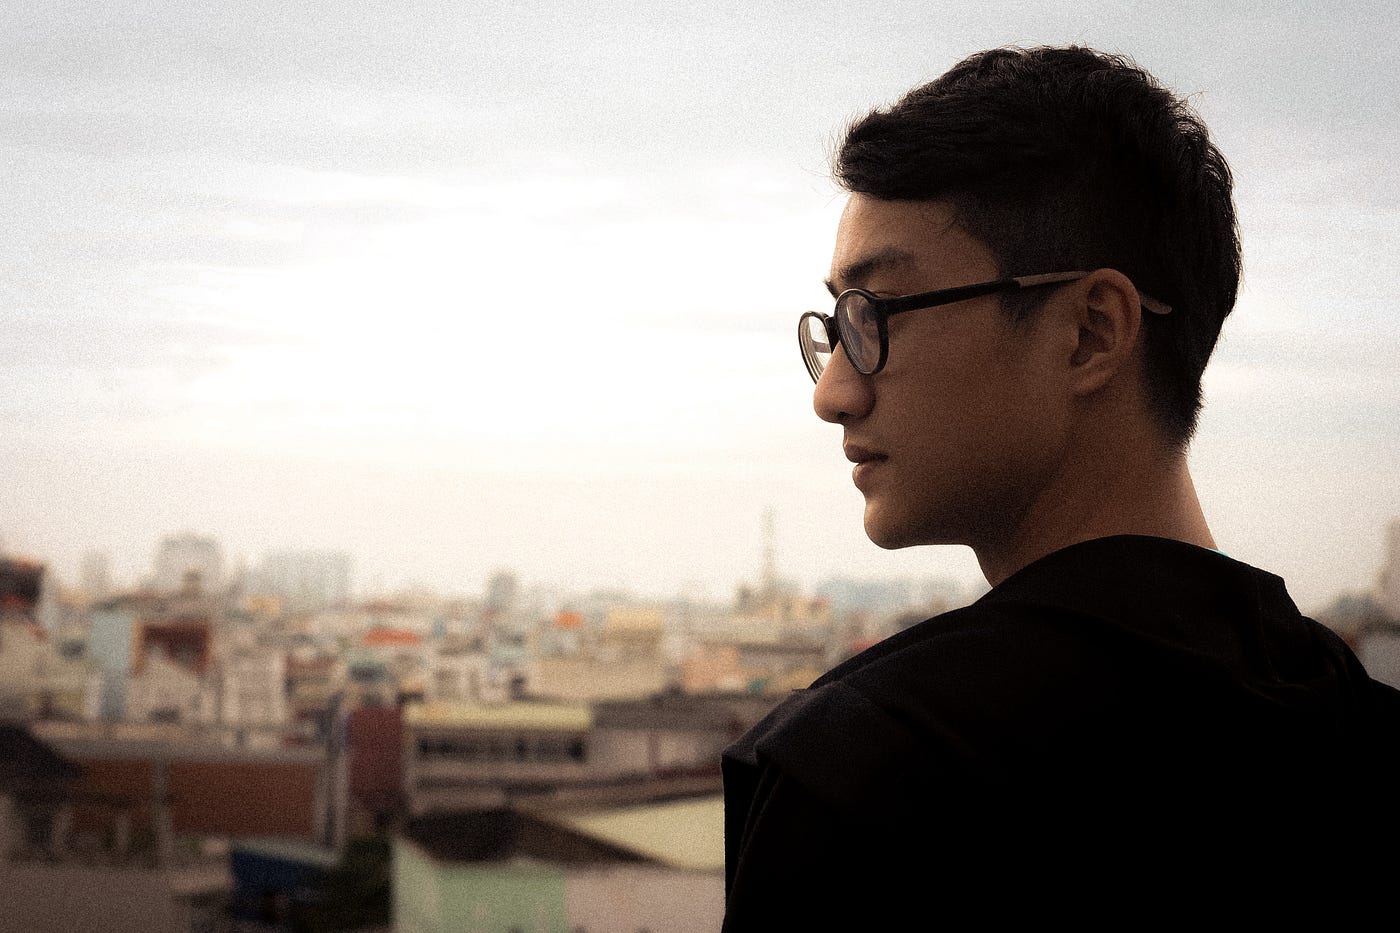 Man with glasses standing on rooftop looking sideways.